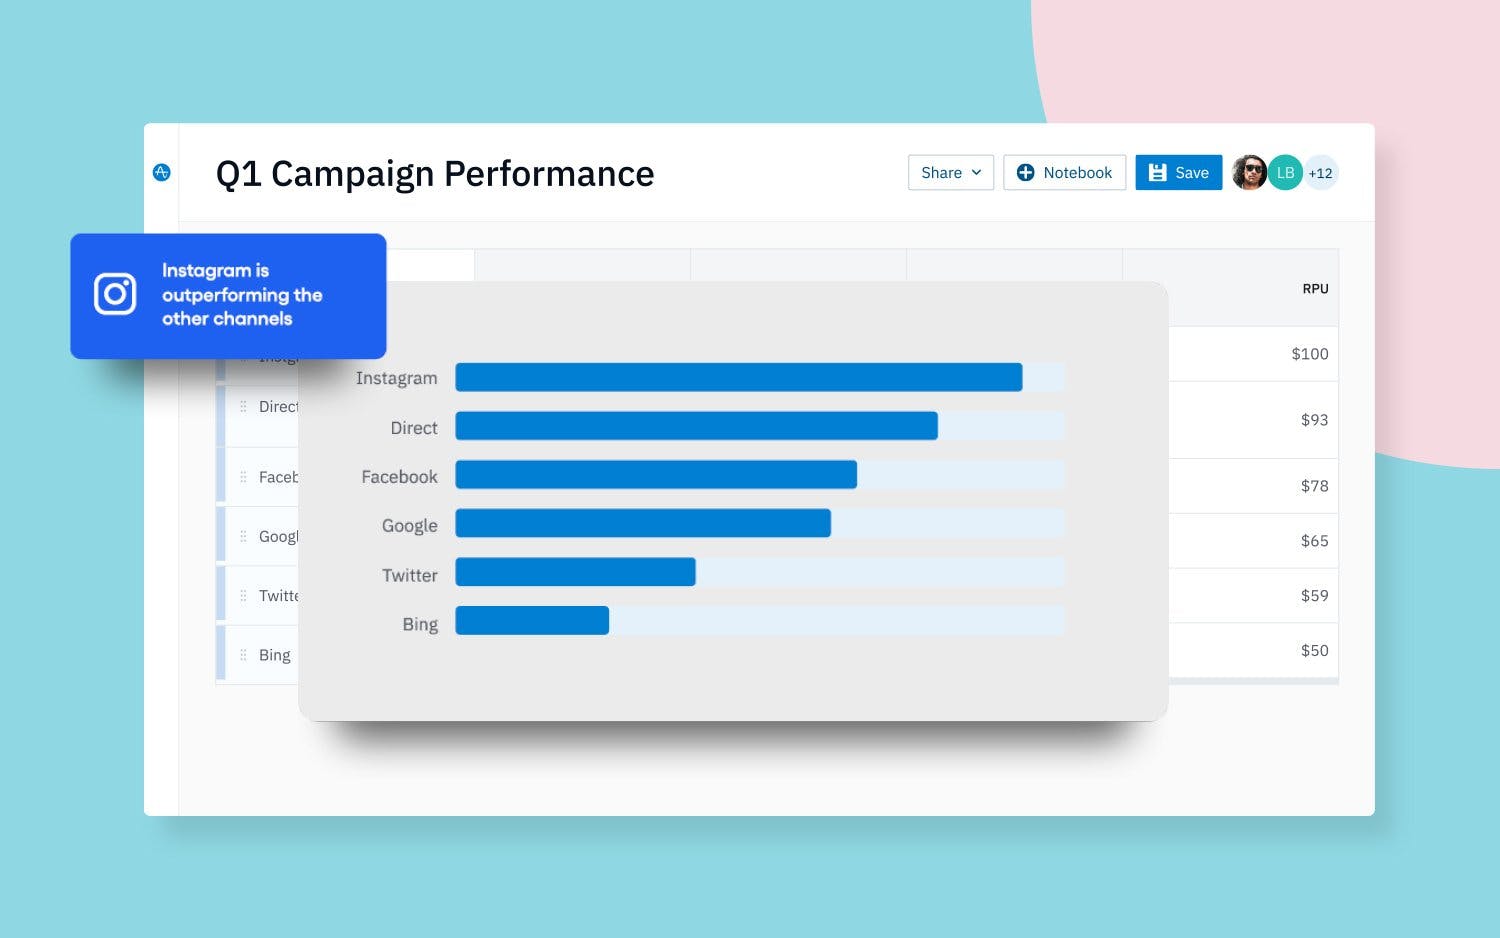 Power your product growth with campaign insights